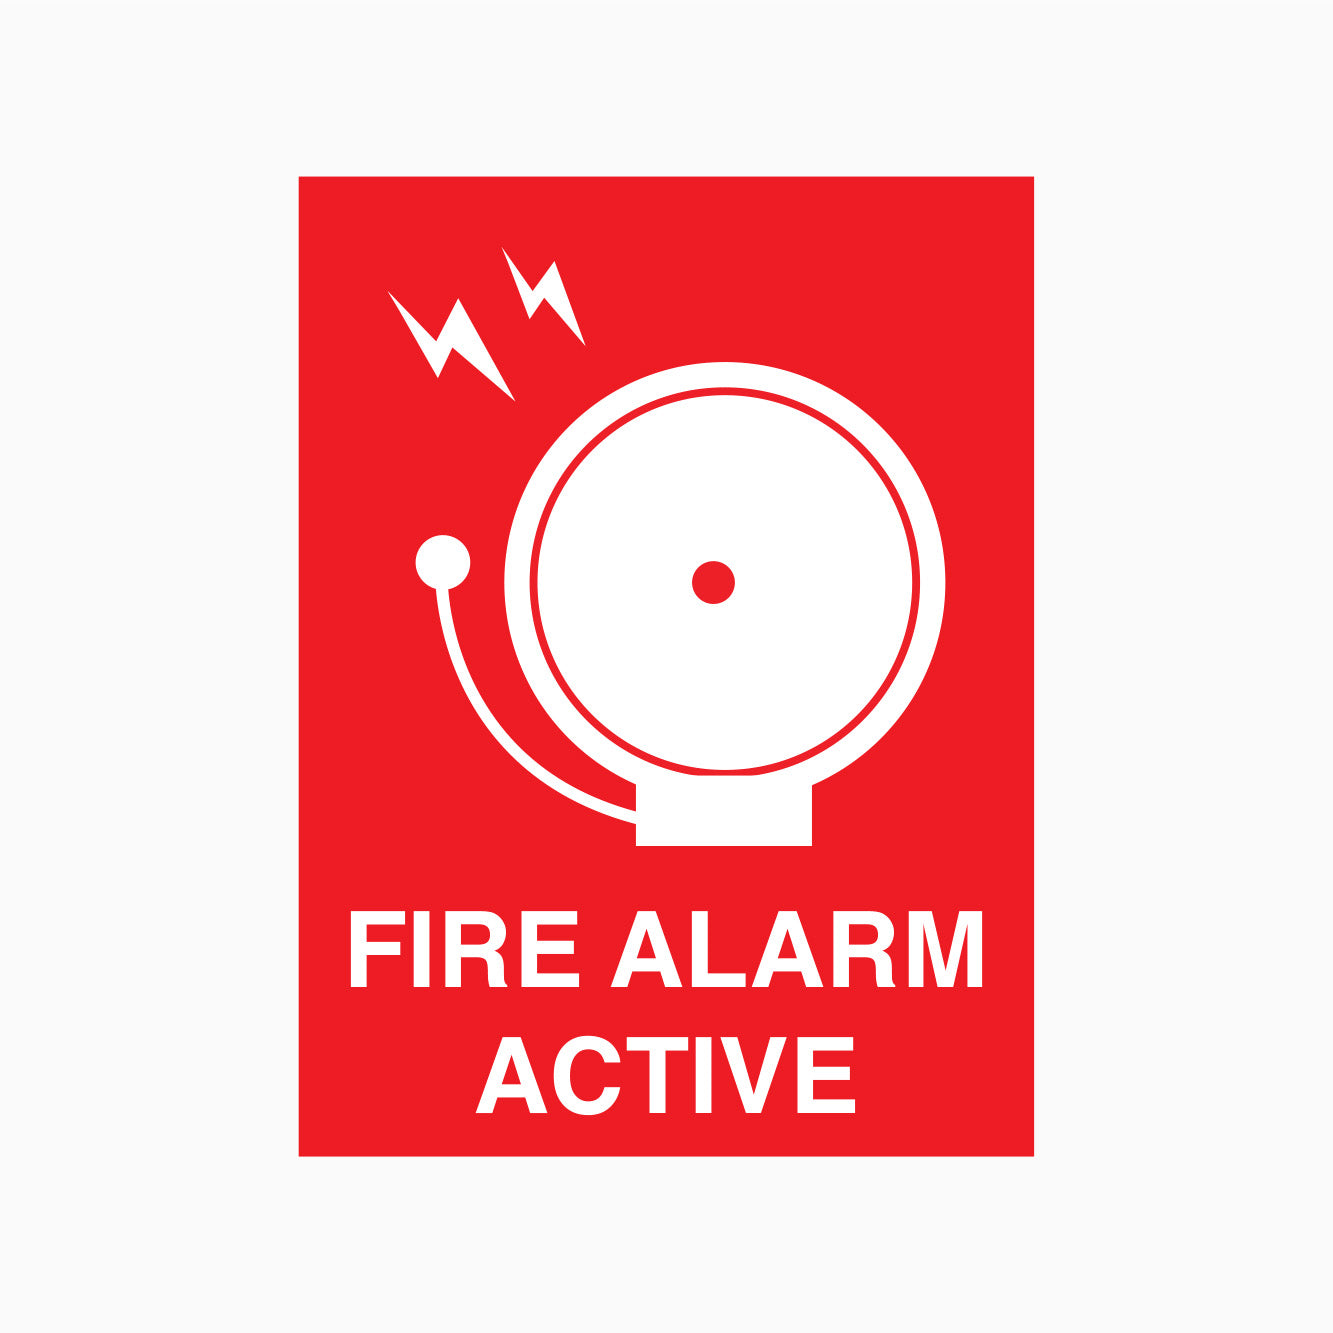 FIRE ALARM ACTIVE SIGN